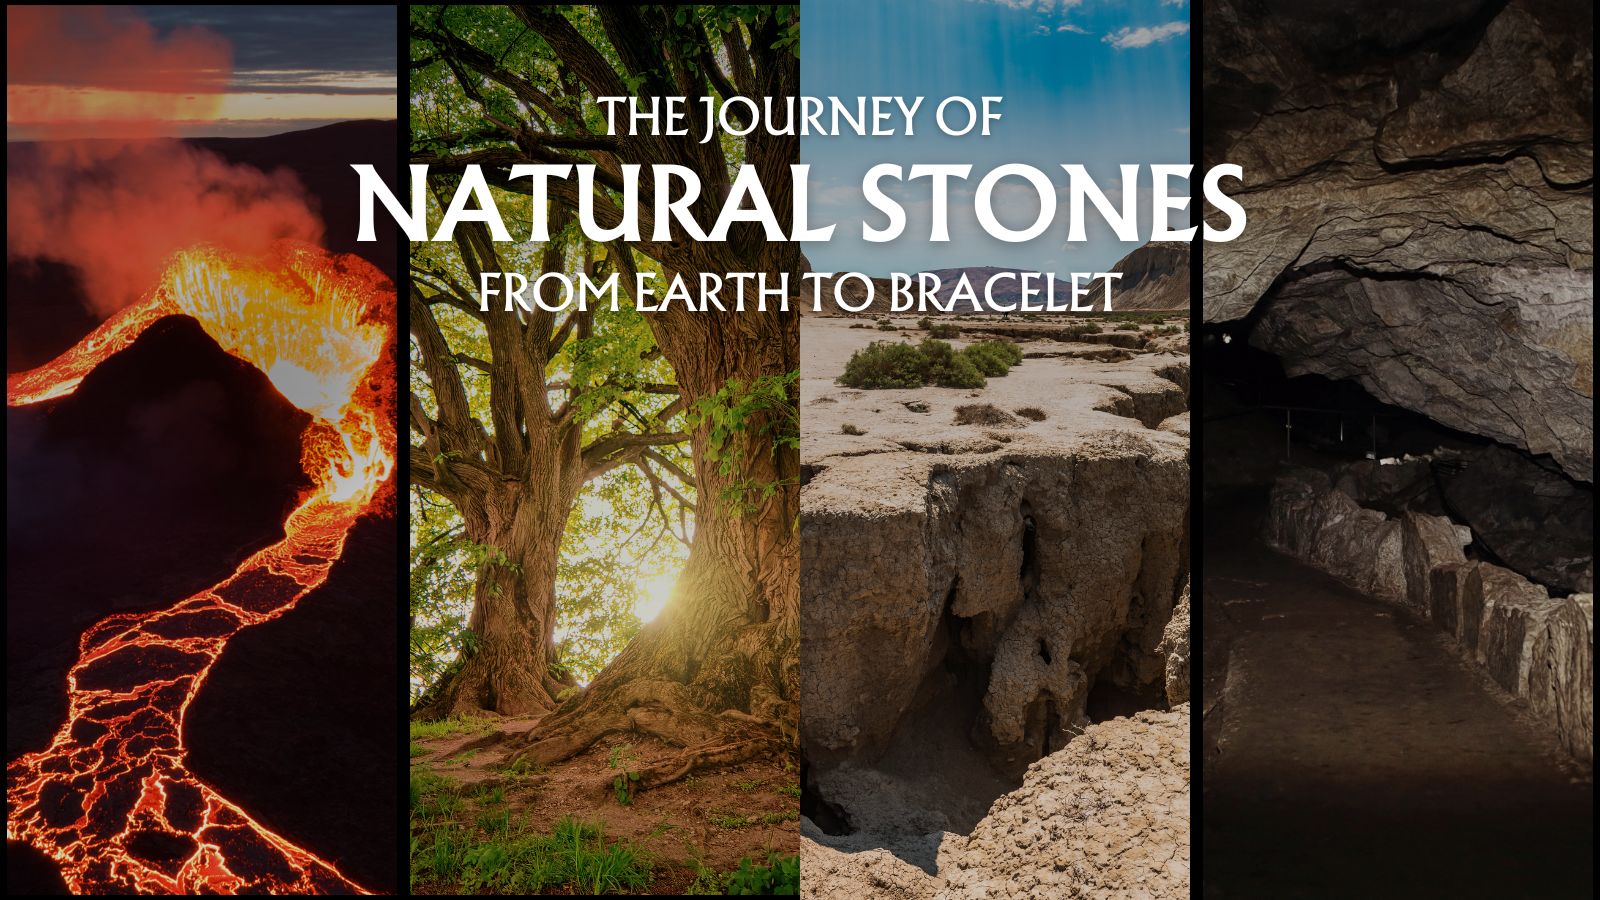 The Journey of Natural Stones: From Earth to Bracelet